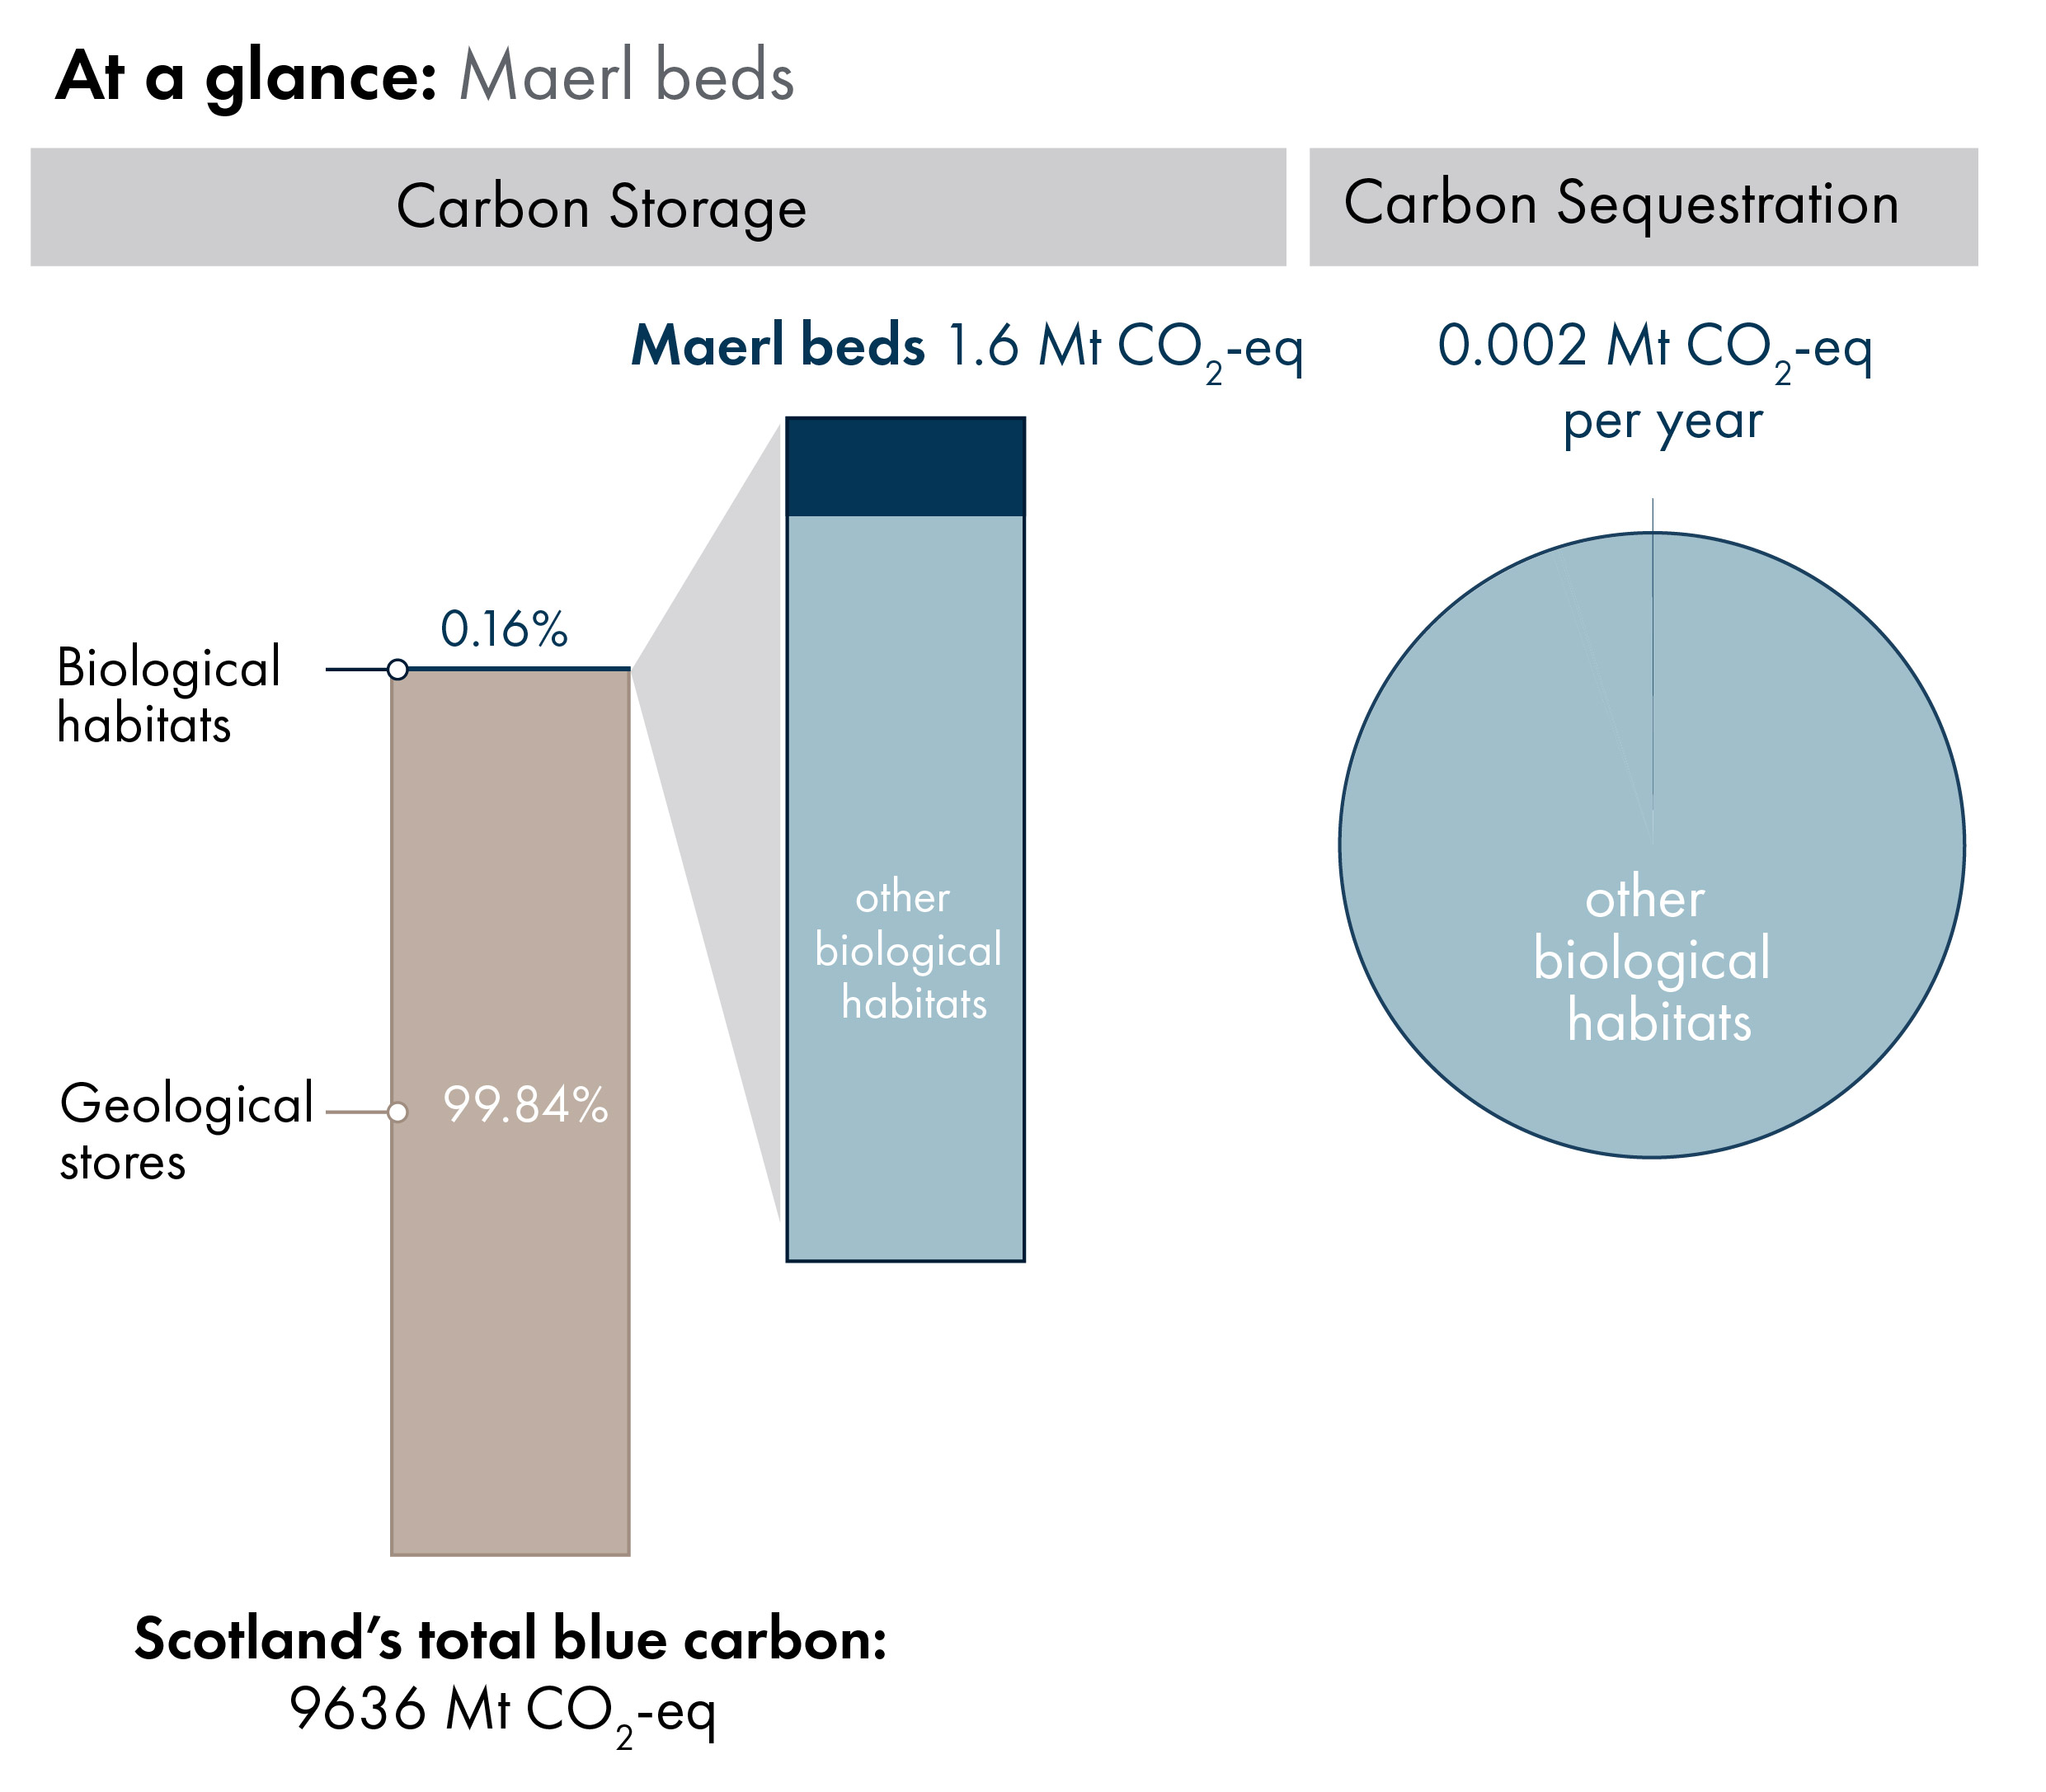 Bar charts showing the proportion of Scotland's blue carbon which is in geological stores (99.84%) versus carbon in biological habitats and species (0.16%). Inset bar chart shows the proportion of carbon in biological habitats which is maerl/maerl bed carbon storage (1.6 megatonnes of carbon dioxide equivalent). Pie chart showing, out of all biological habitats, the proportion which is sequestered annually by seagrasses.